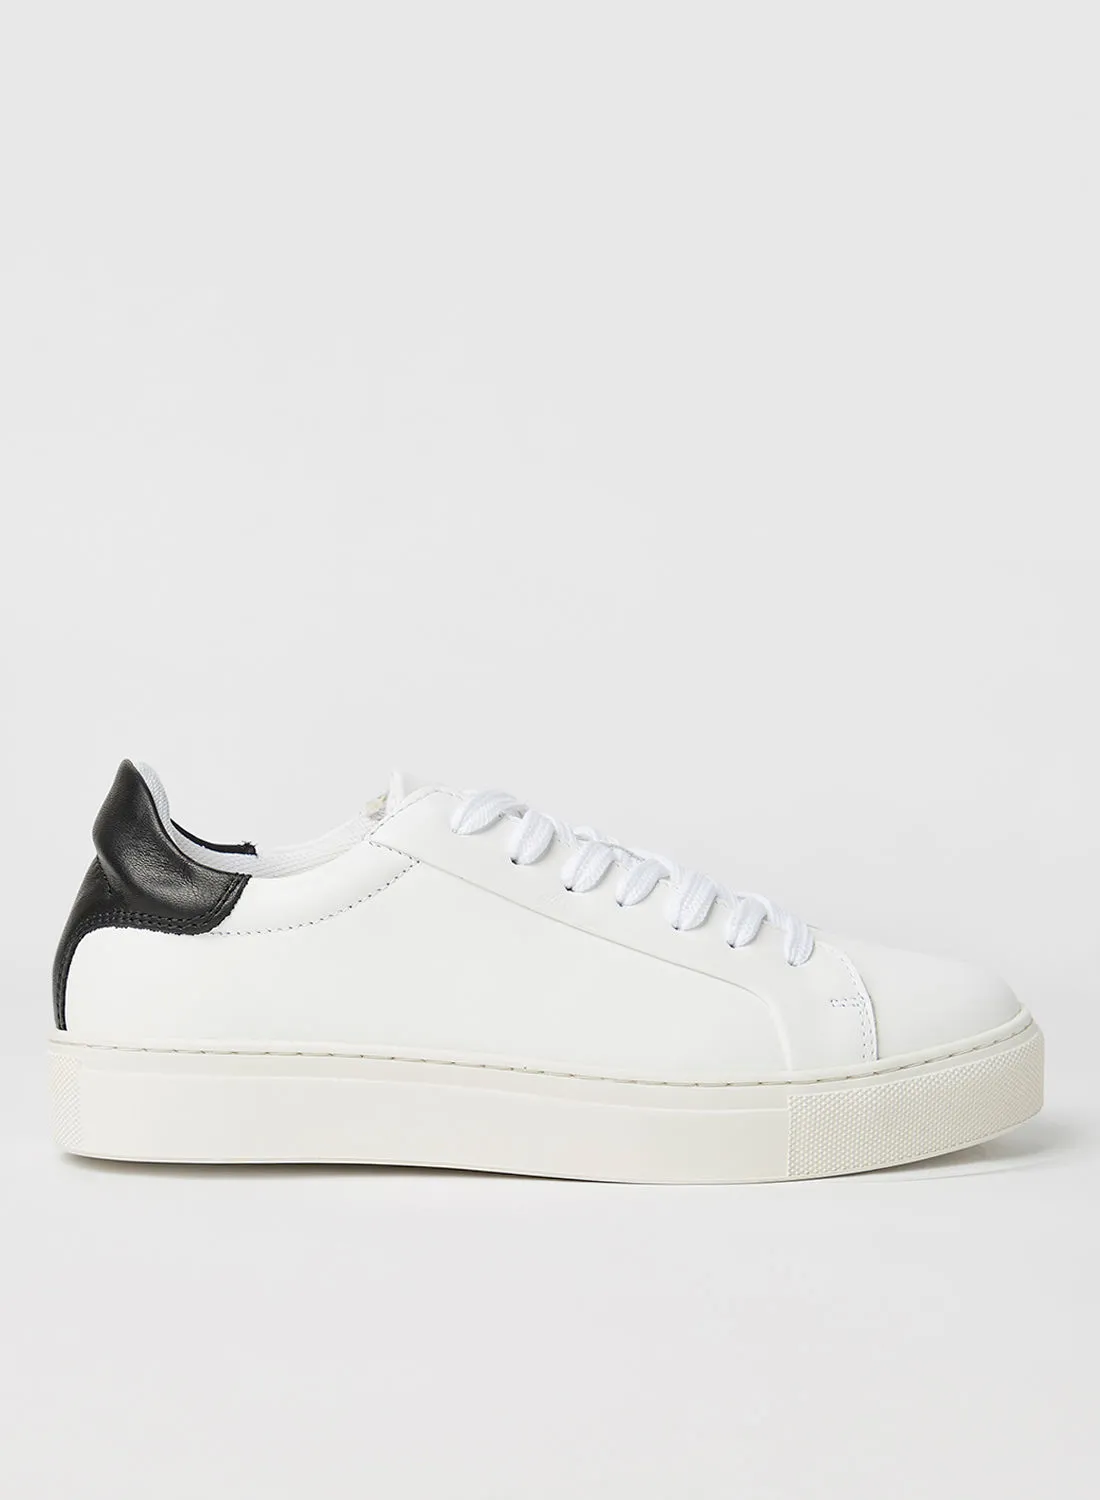 SELECTED FEMME Contrast Panel Leather Sneakers White/Black